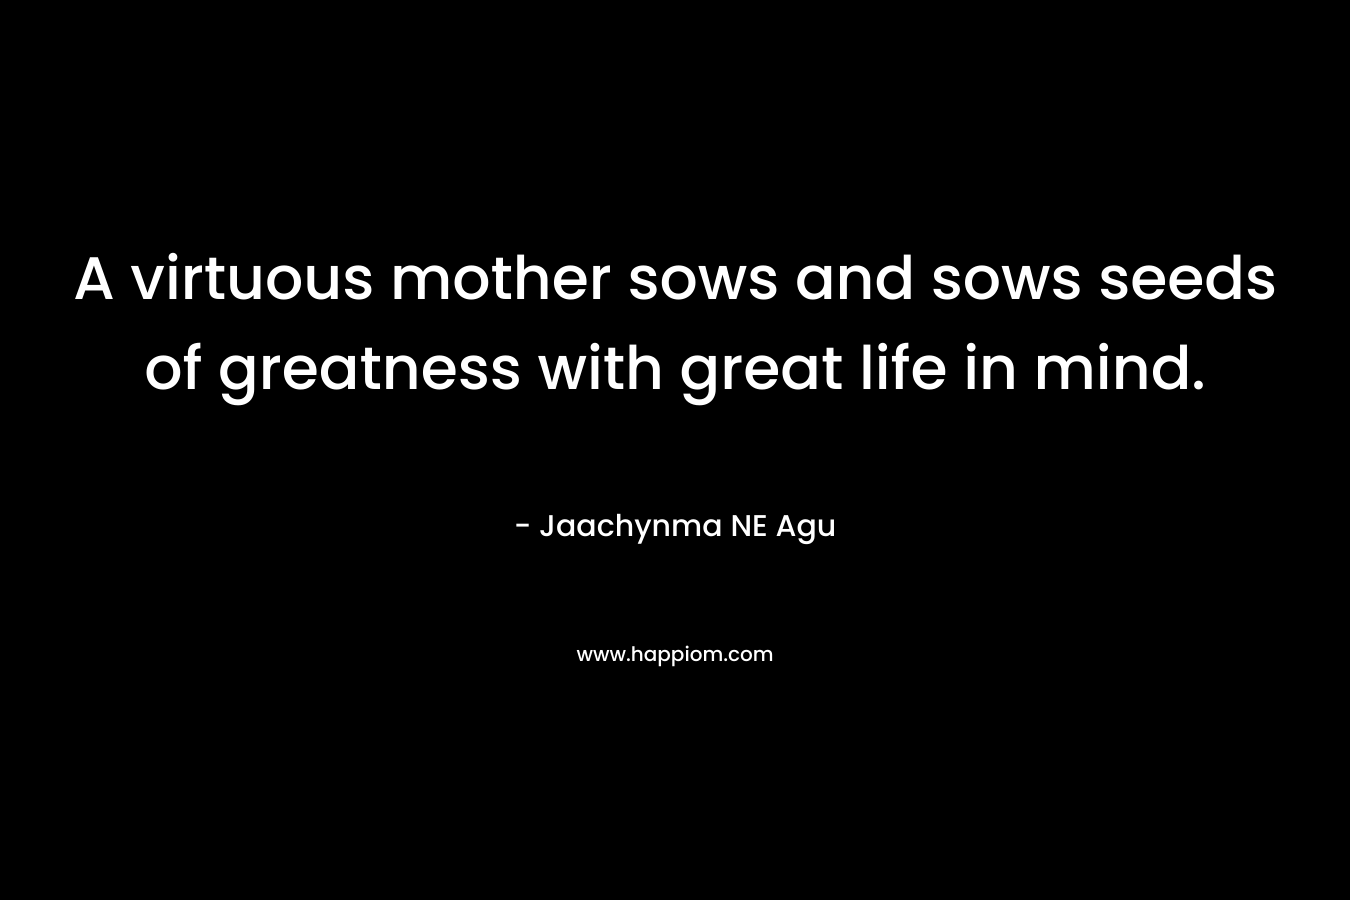 A virtuous mother sows and sows seeds of greatness with great life in mind. – Jaachynma NE Agu